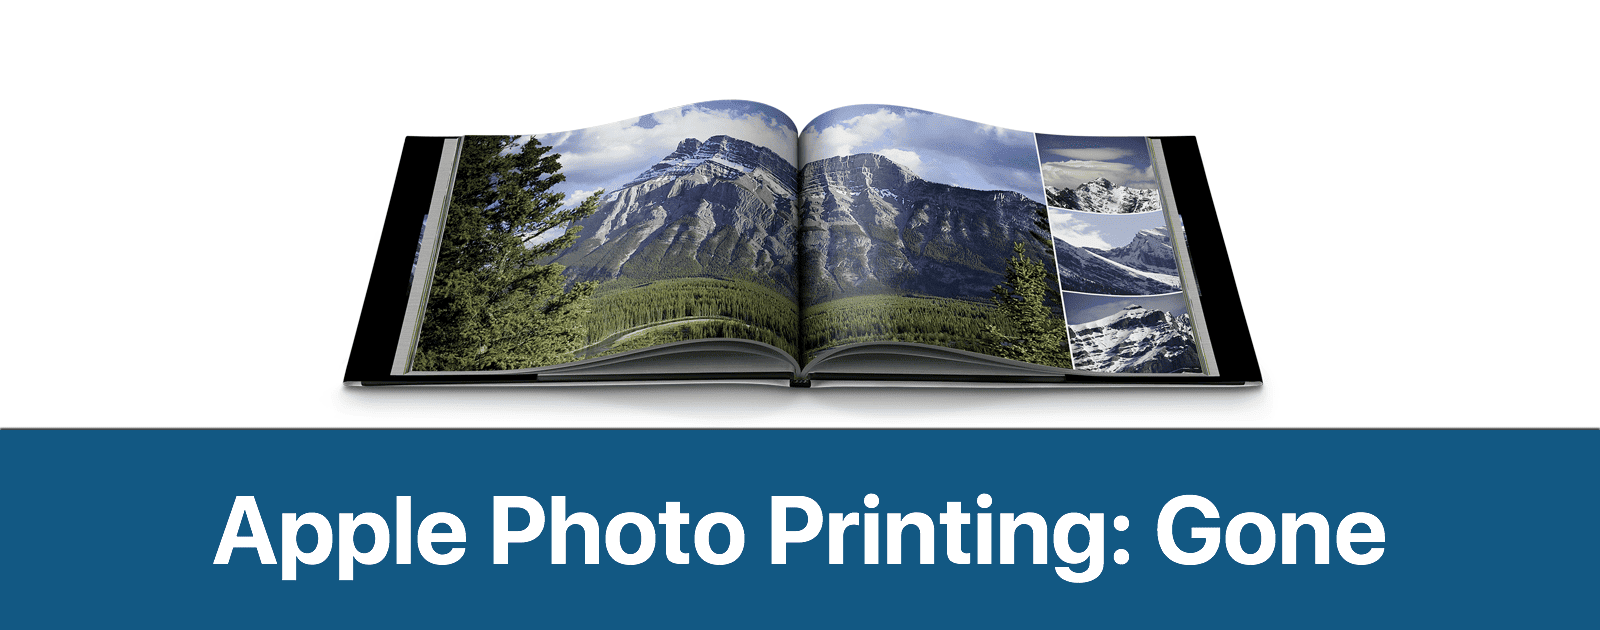 Apple Photo Printing Service Has Been Discontinued